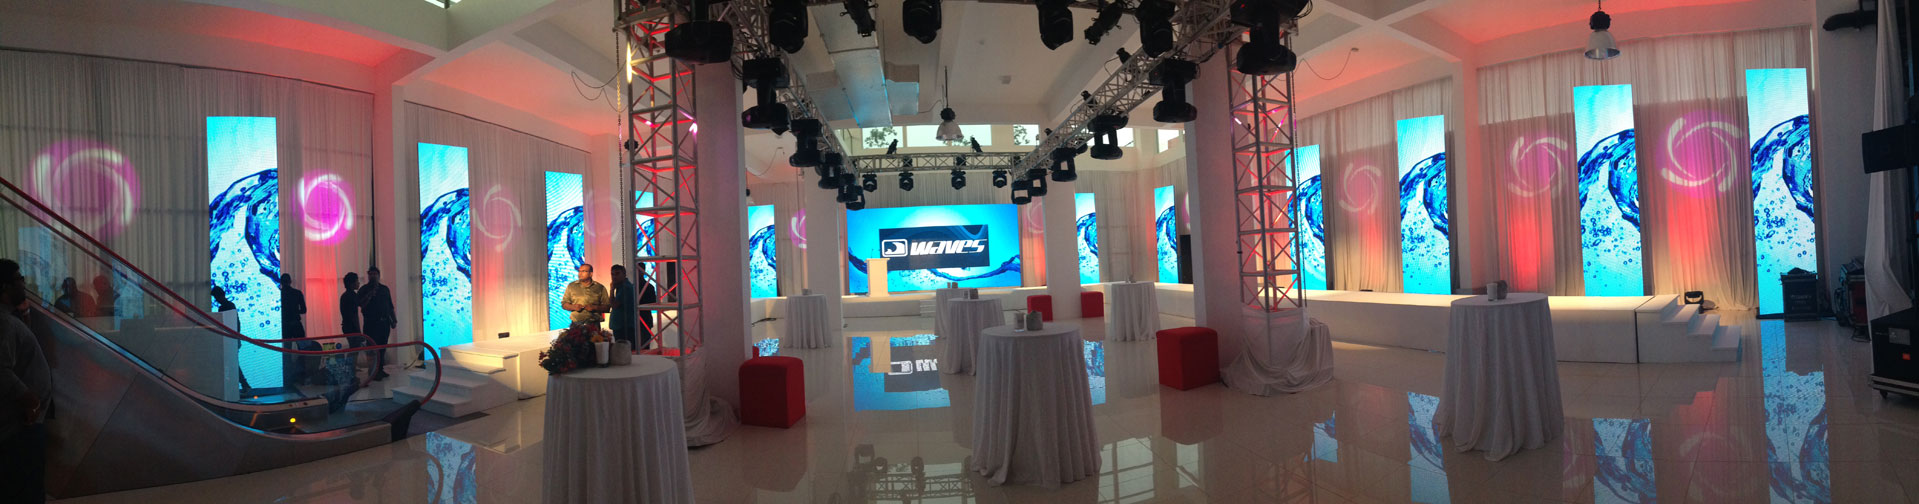 Automobile Exhibition is a Big Part of the LED Transparent Screen Rental Industry Market!